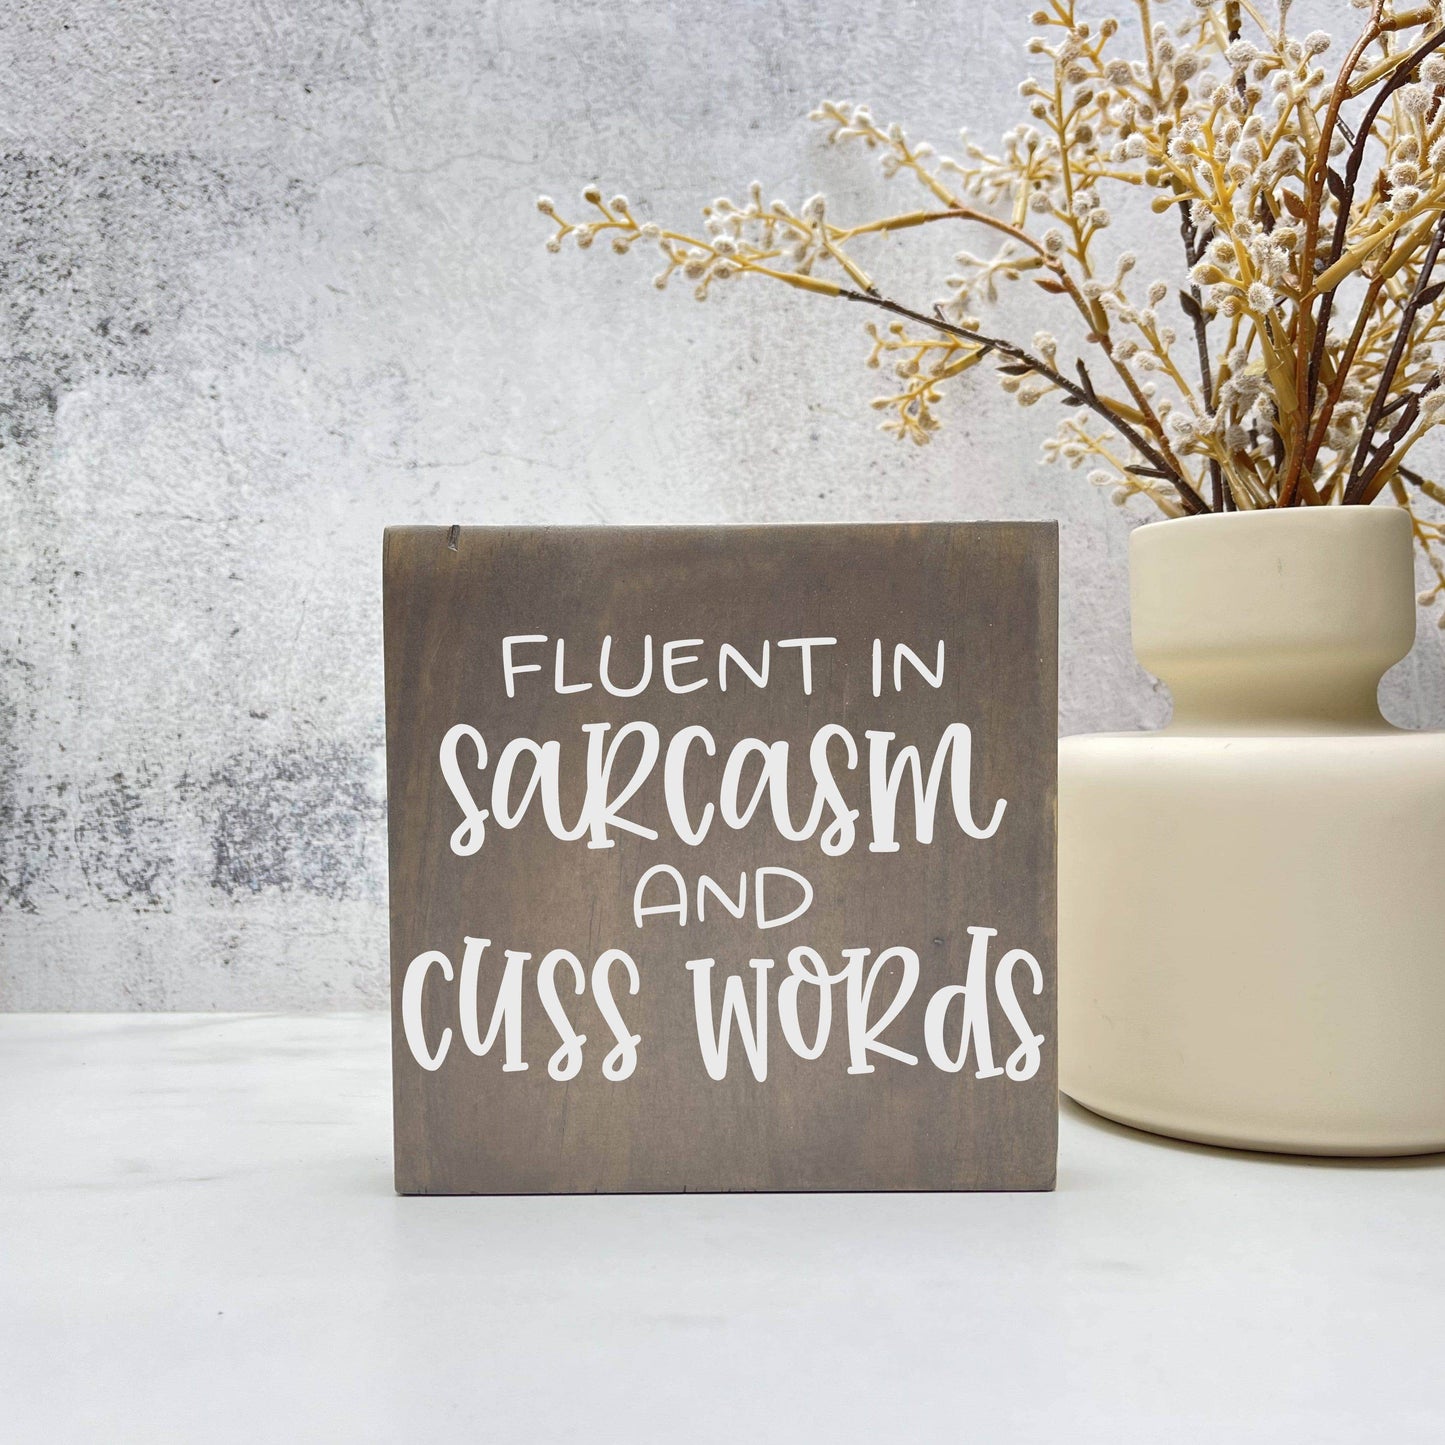 Fluent in Sarcasm and Cuss Words wood sign, quote sign, rustic decor, home decor